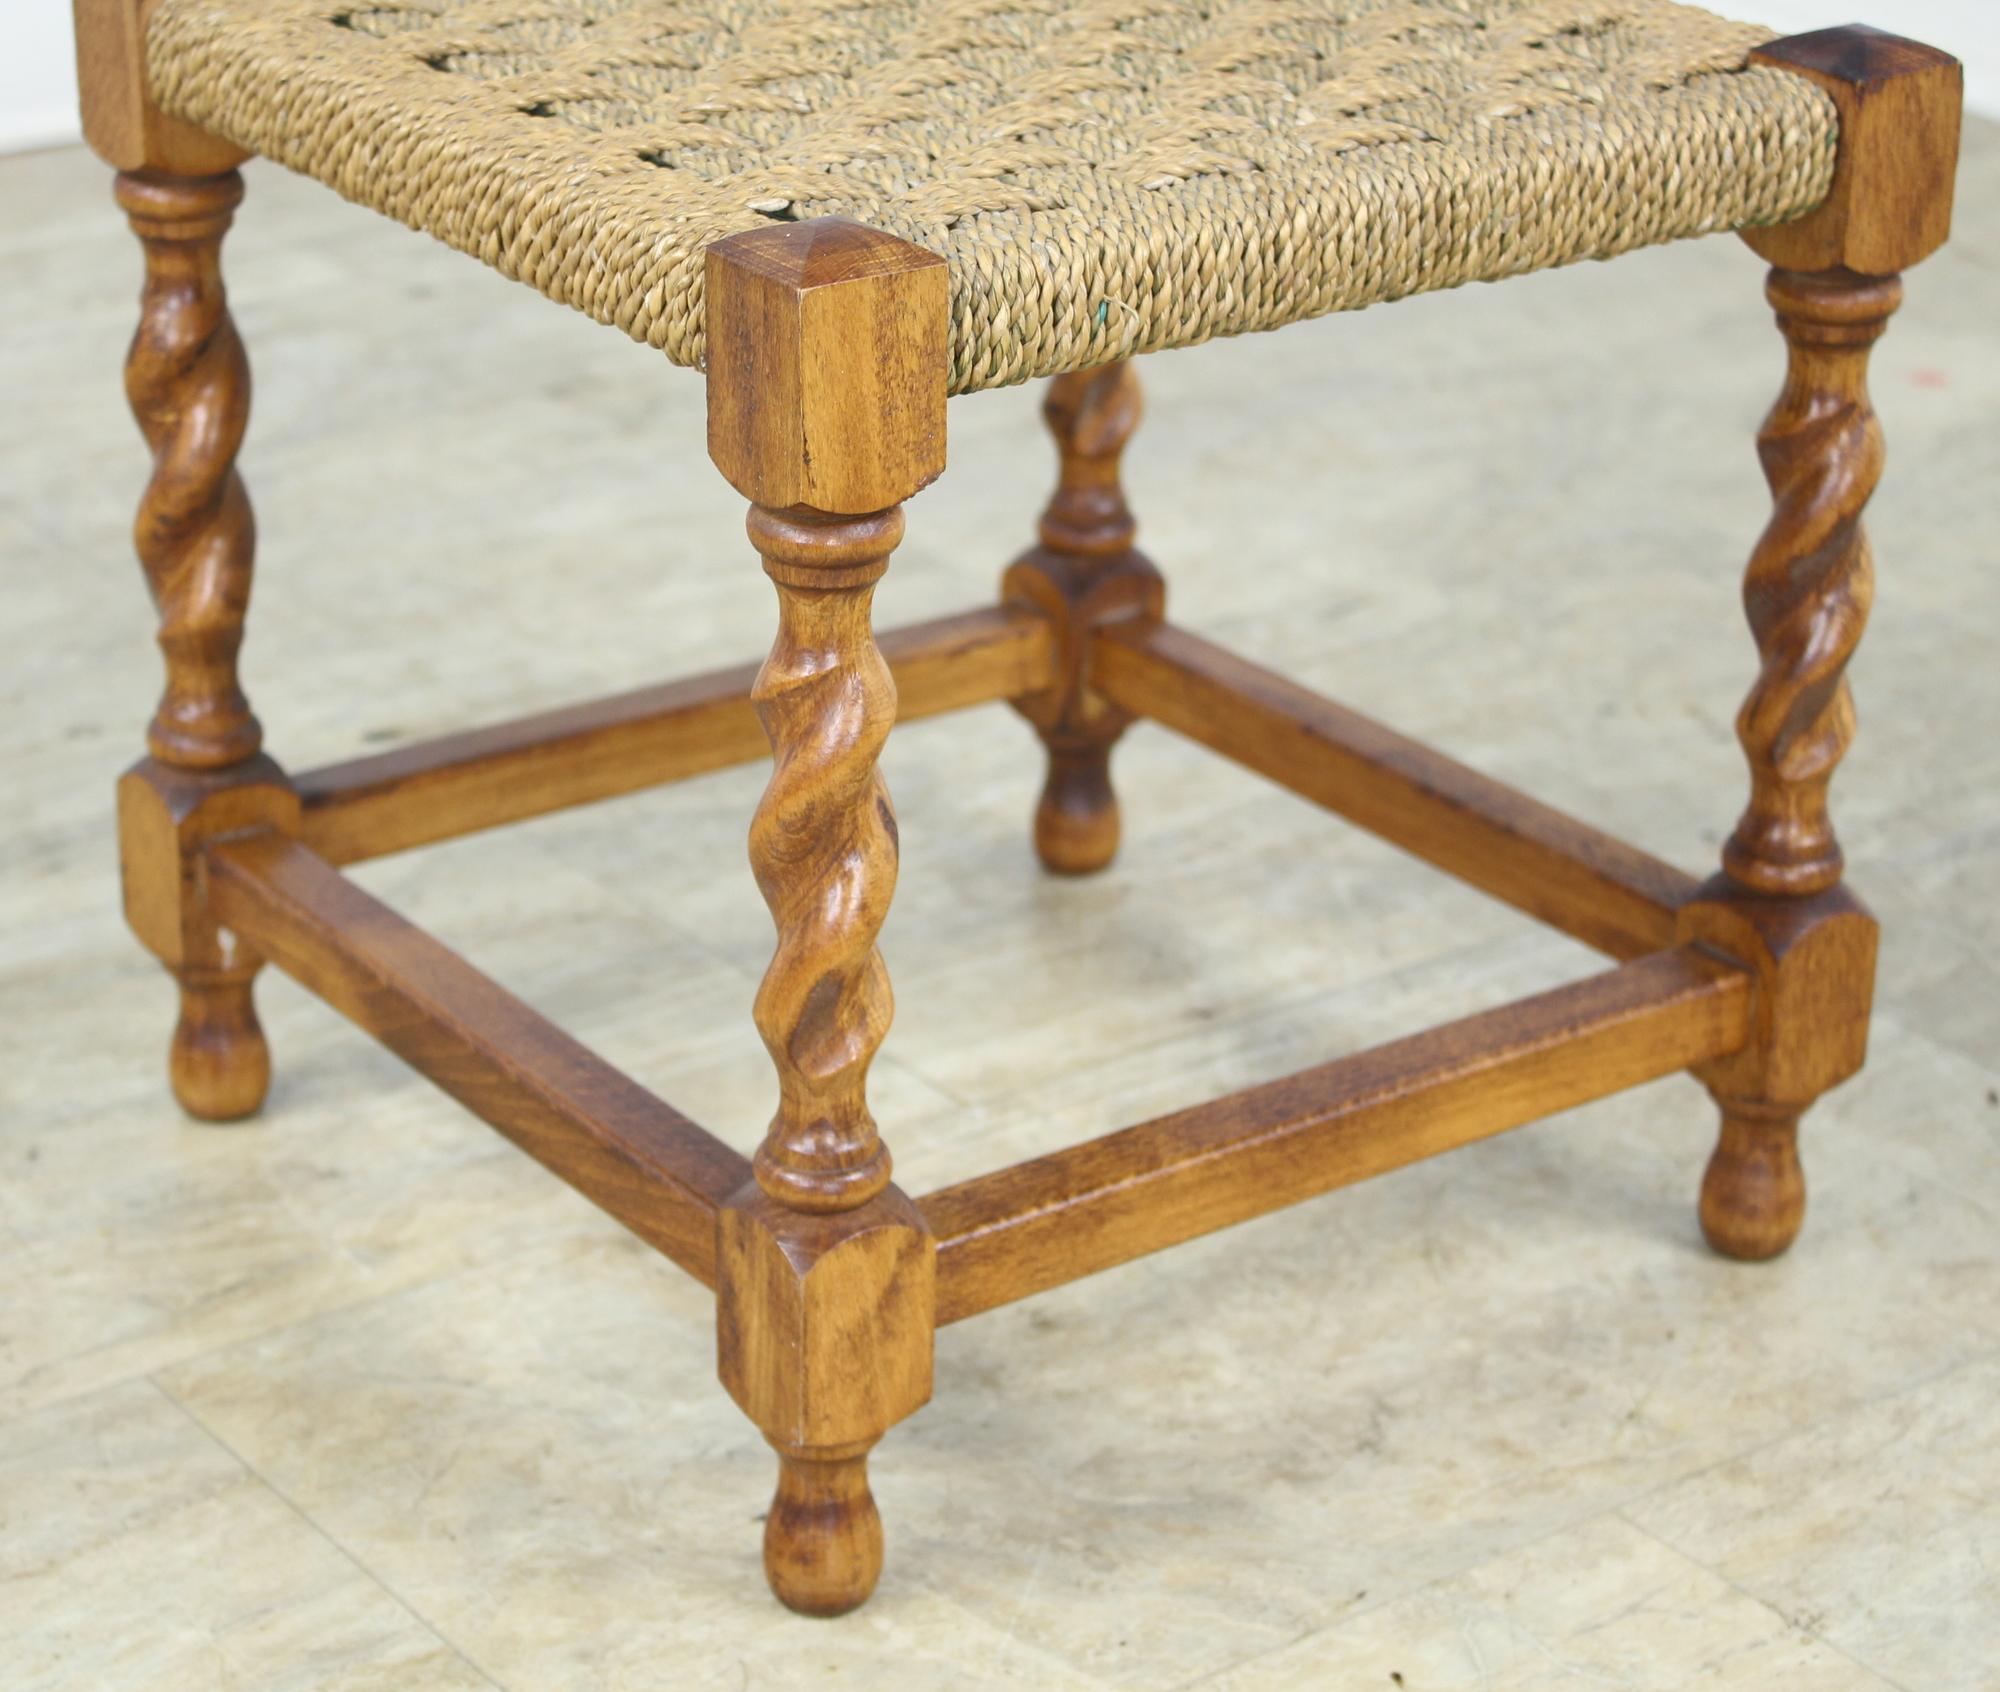 A sweet little string stool, perfect for the bedroom, living room or as a perch by the fireplace. Beautiful barley twist legs. Pretty!